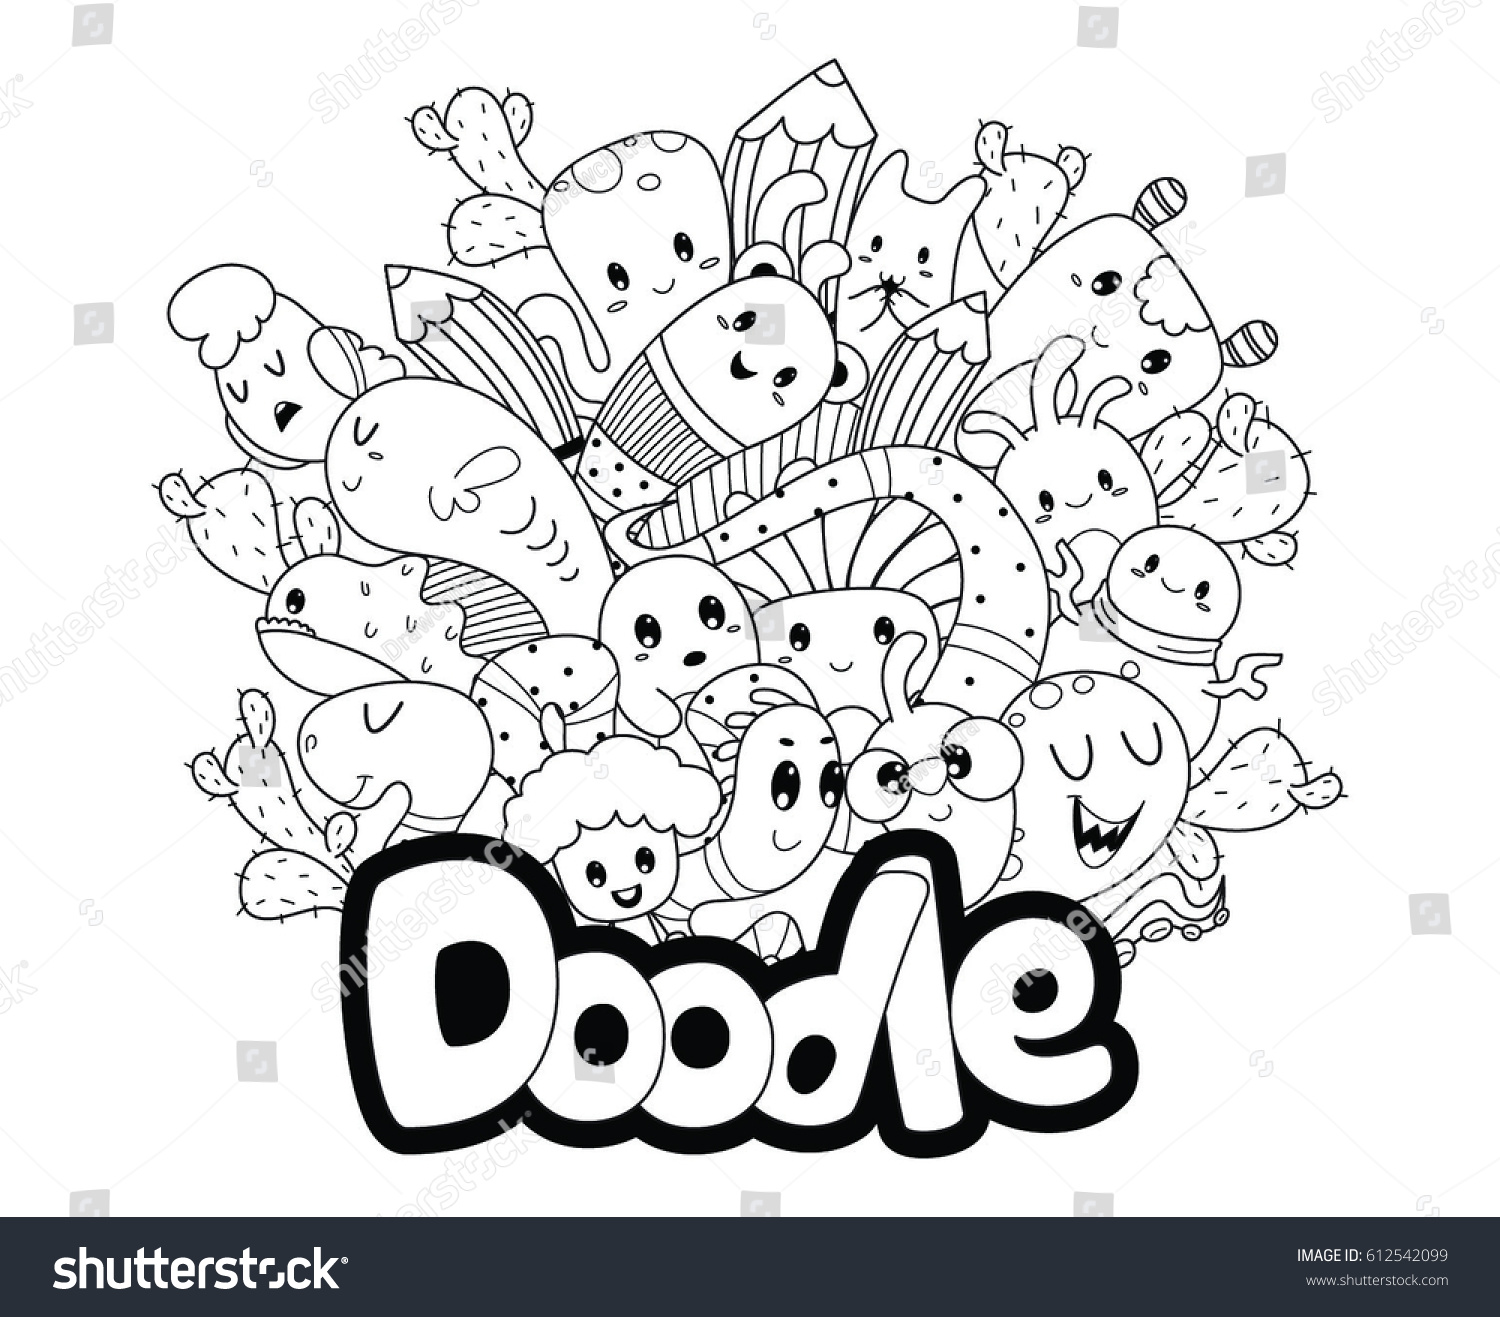 Doodle Art Containing Some Alien Character Stock Vector Royalty